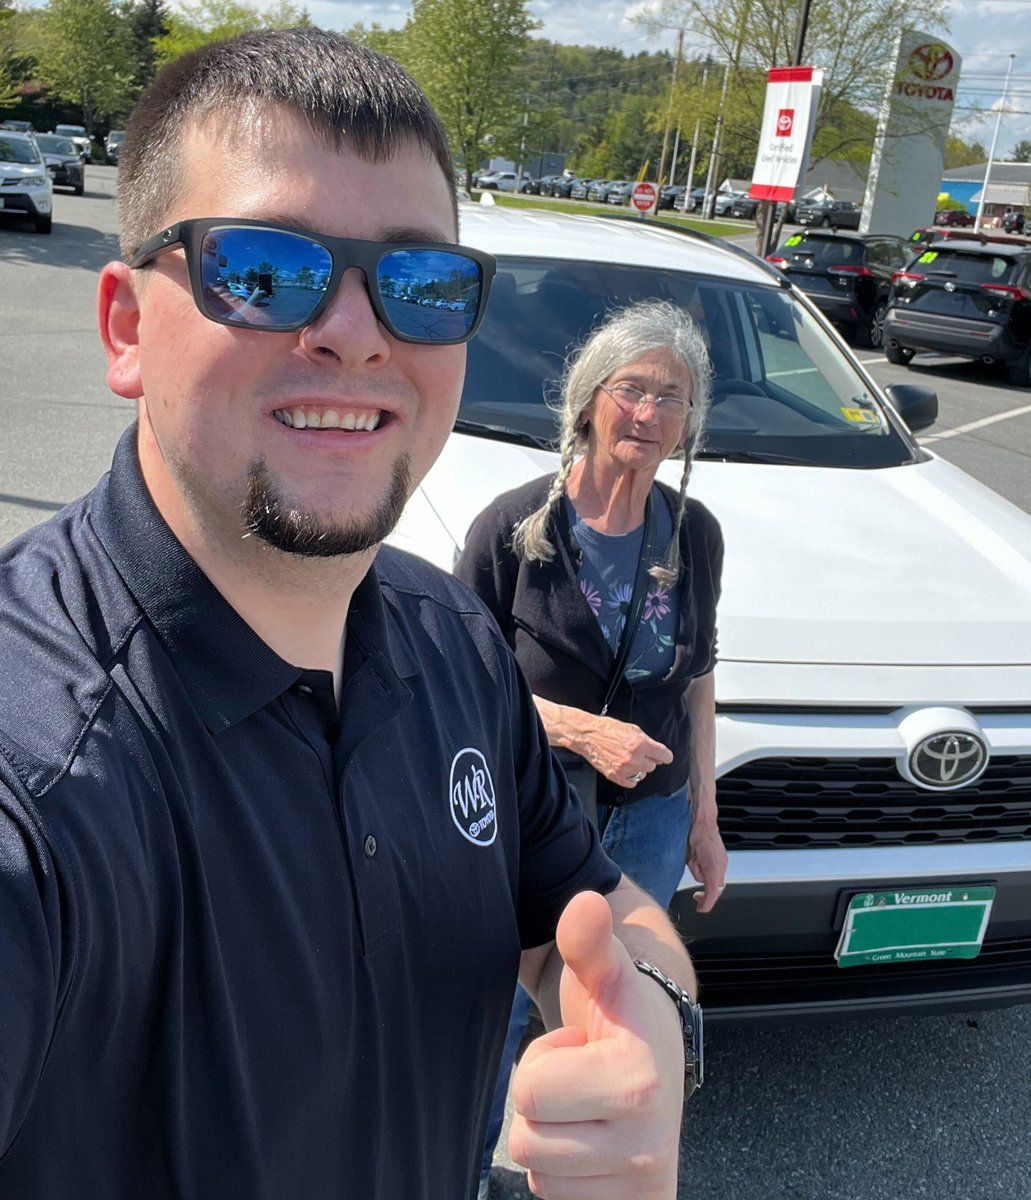 Happy #NewCarDay to Barbara! She snagged this beautiful 2021 @Toyota RAV4, thanks to some help from Tyler Gillis - Congrats!

Learn more about Tyler & check out his reviews on @DealerRater: bit.ly/4aXbyvL

#Toyota #LetsGoPlaces #RAV4